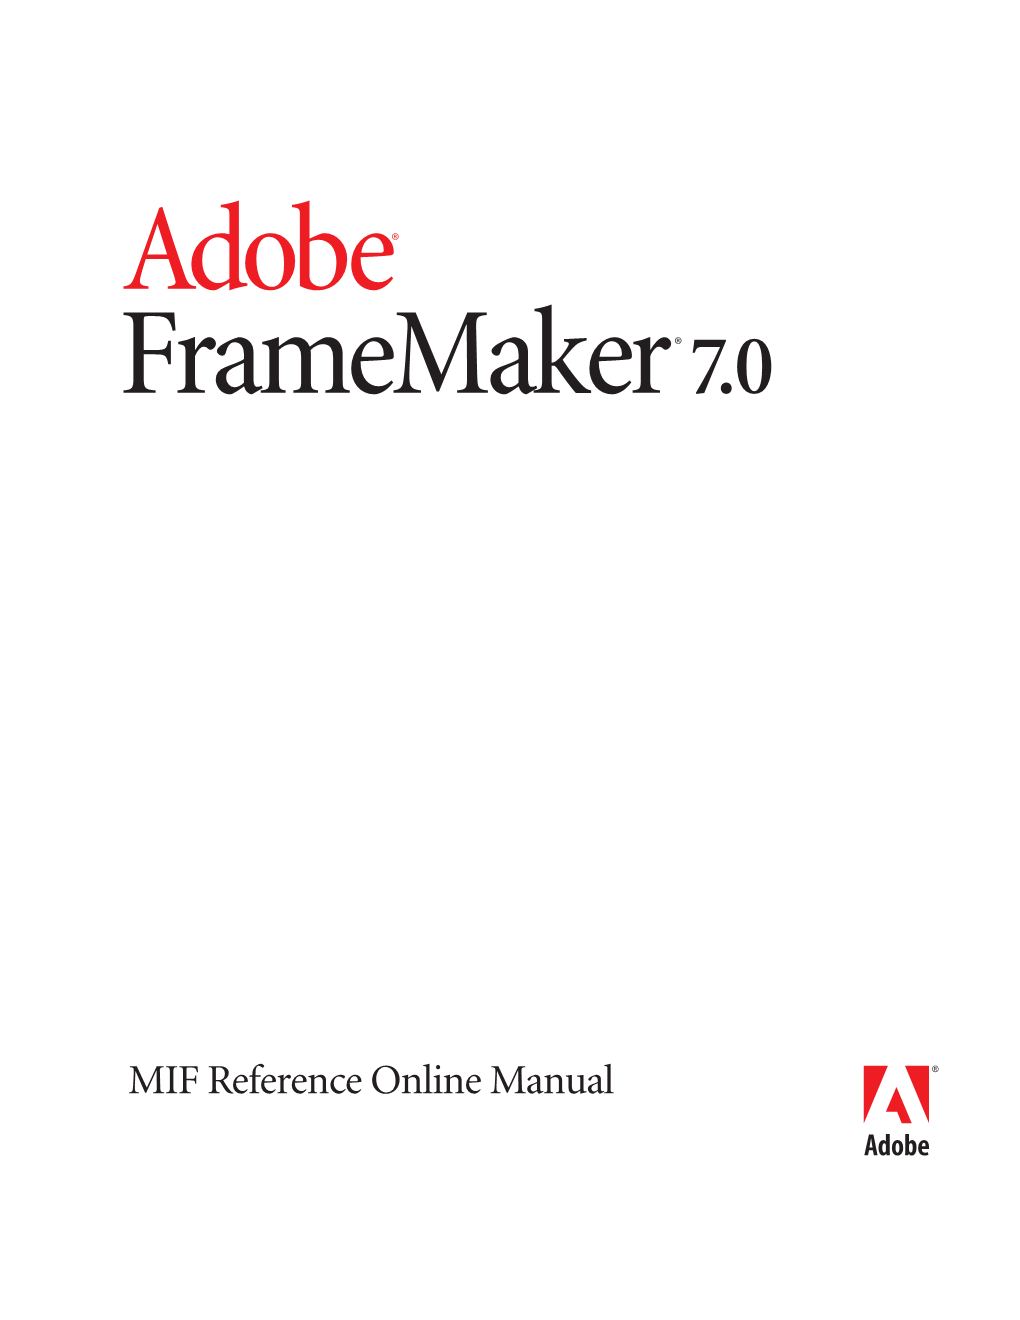 MIF Reference Online Manual